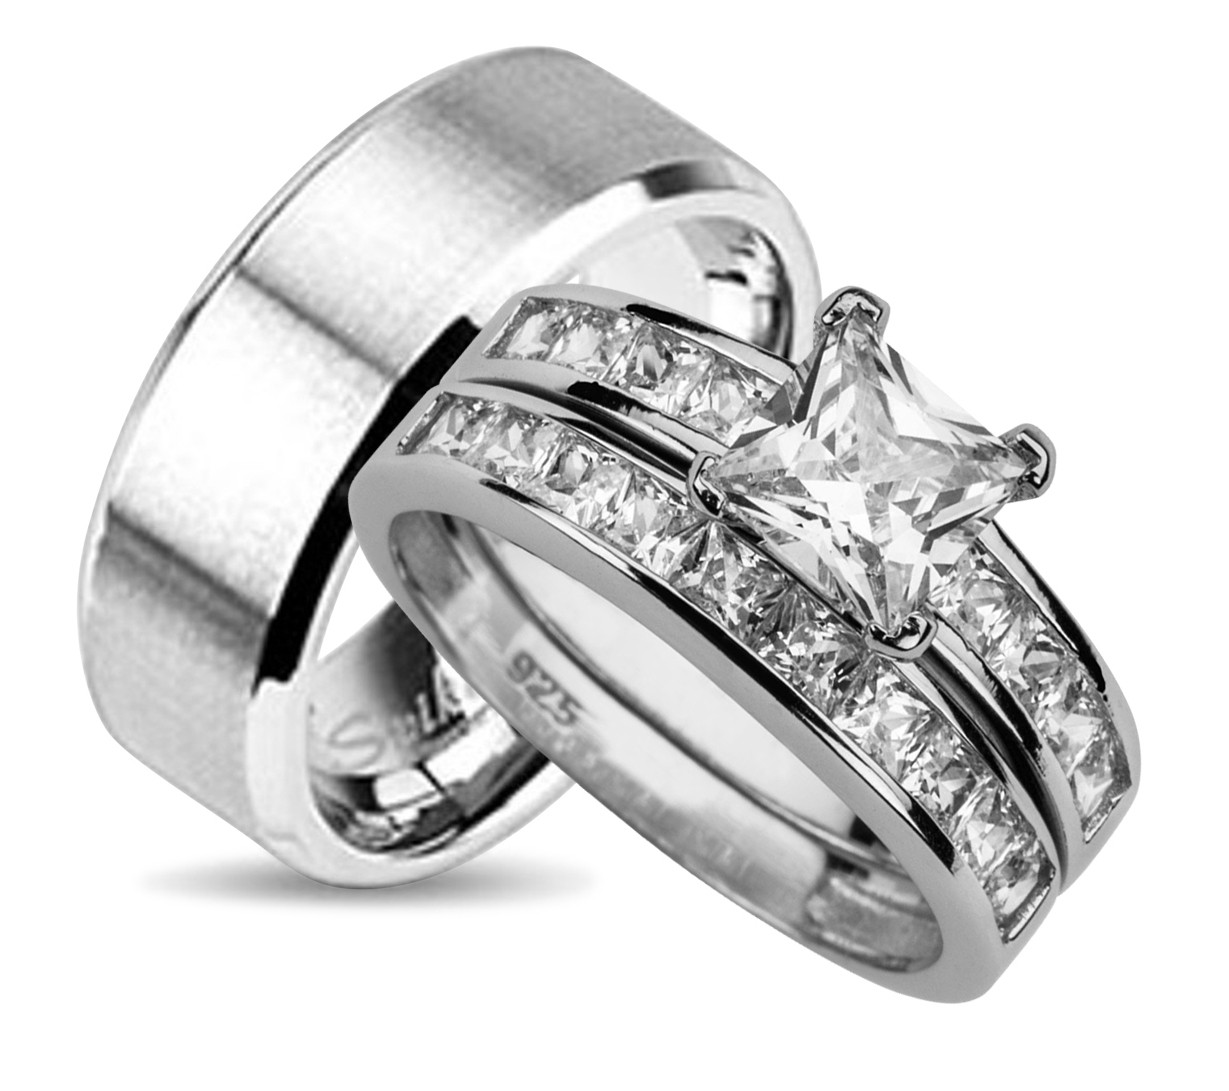 Cheap Wedding Rings For Him And Her
 View Full Gallery of Beautiful Cheap Wedding Sets His and